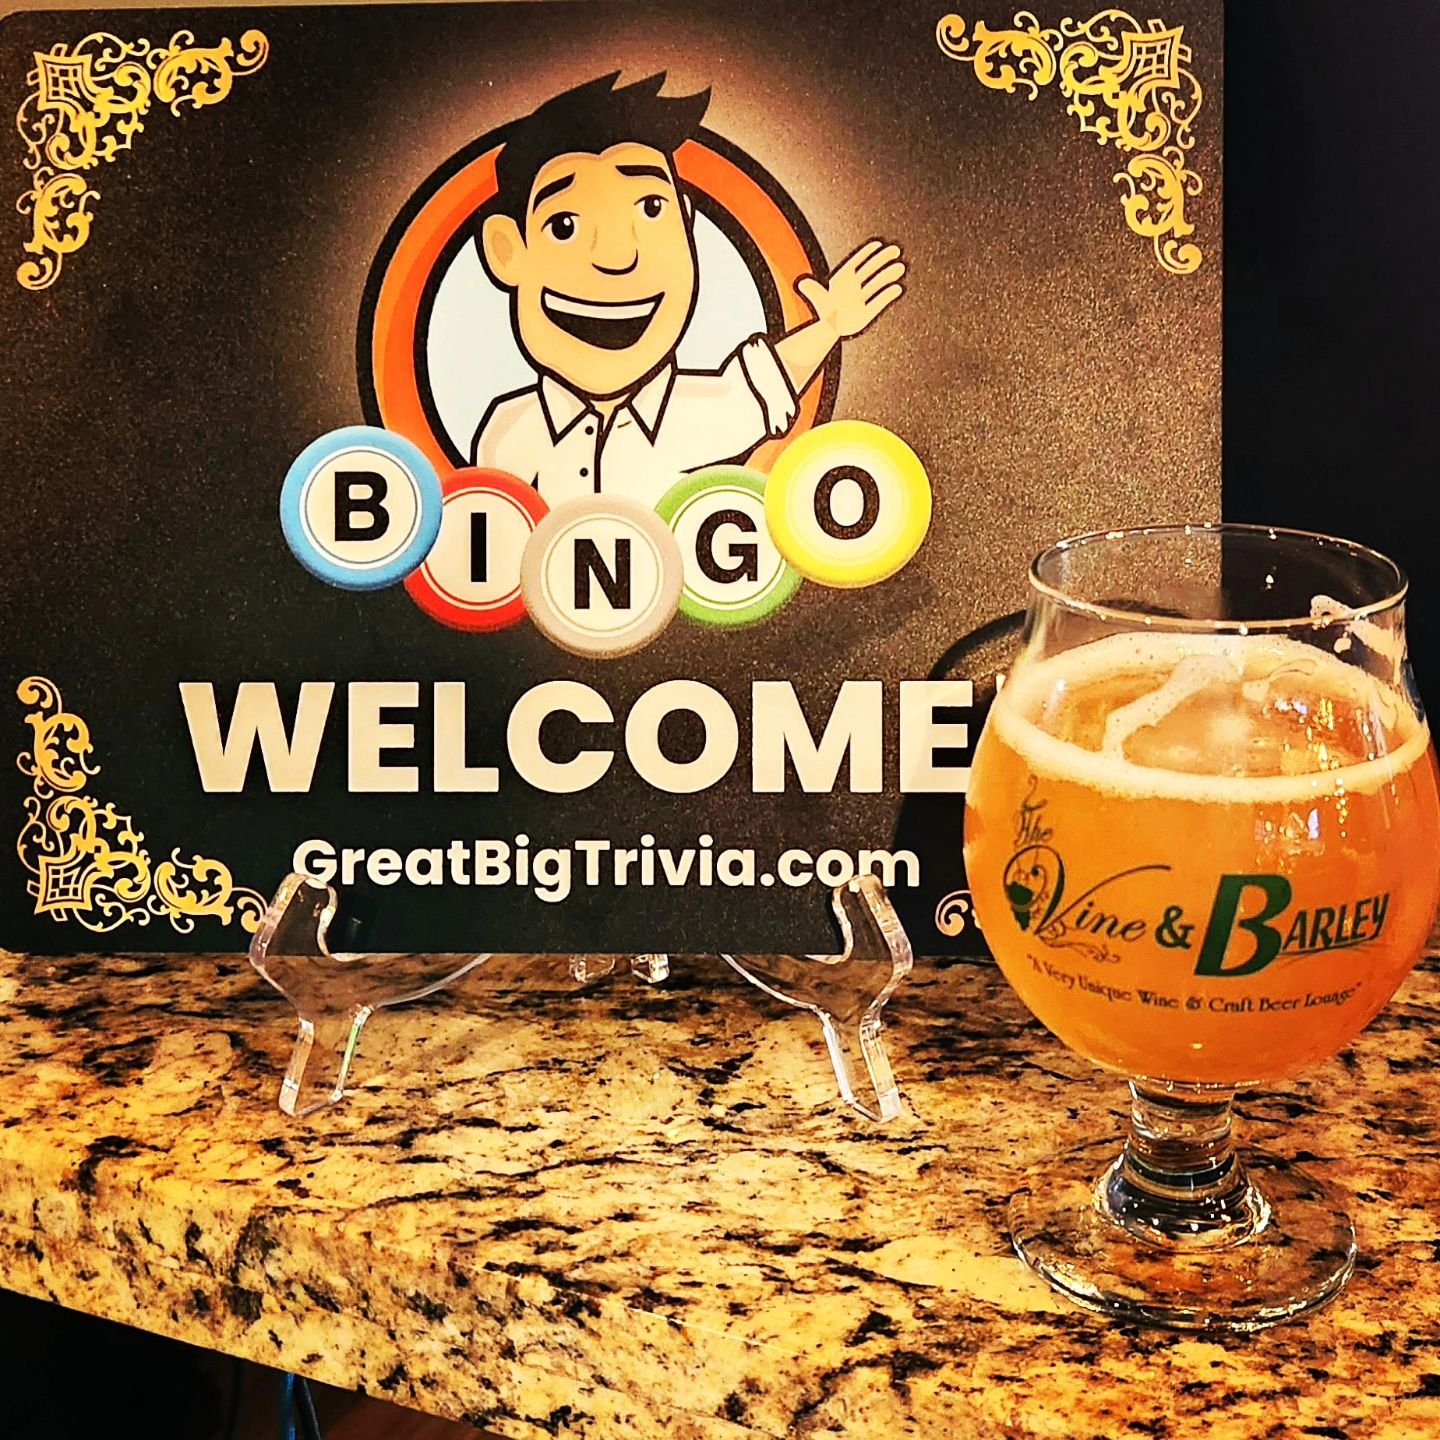 Music Bingo Starts at 7PM! Come hang out.